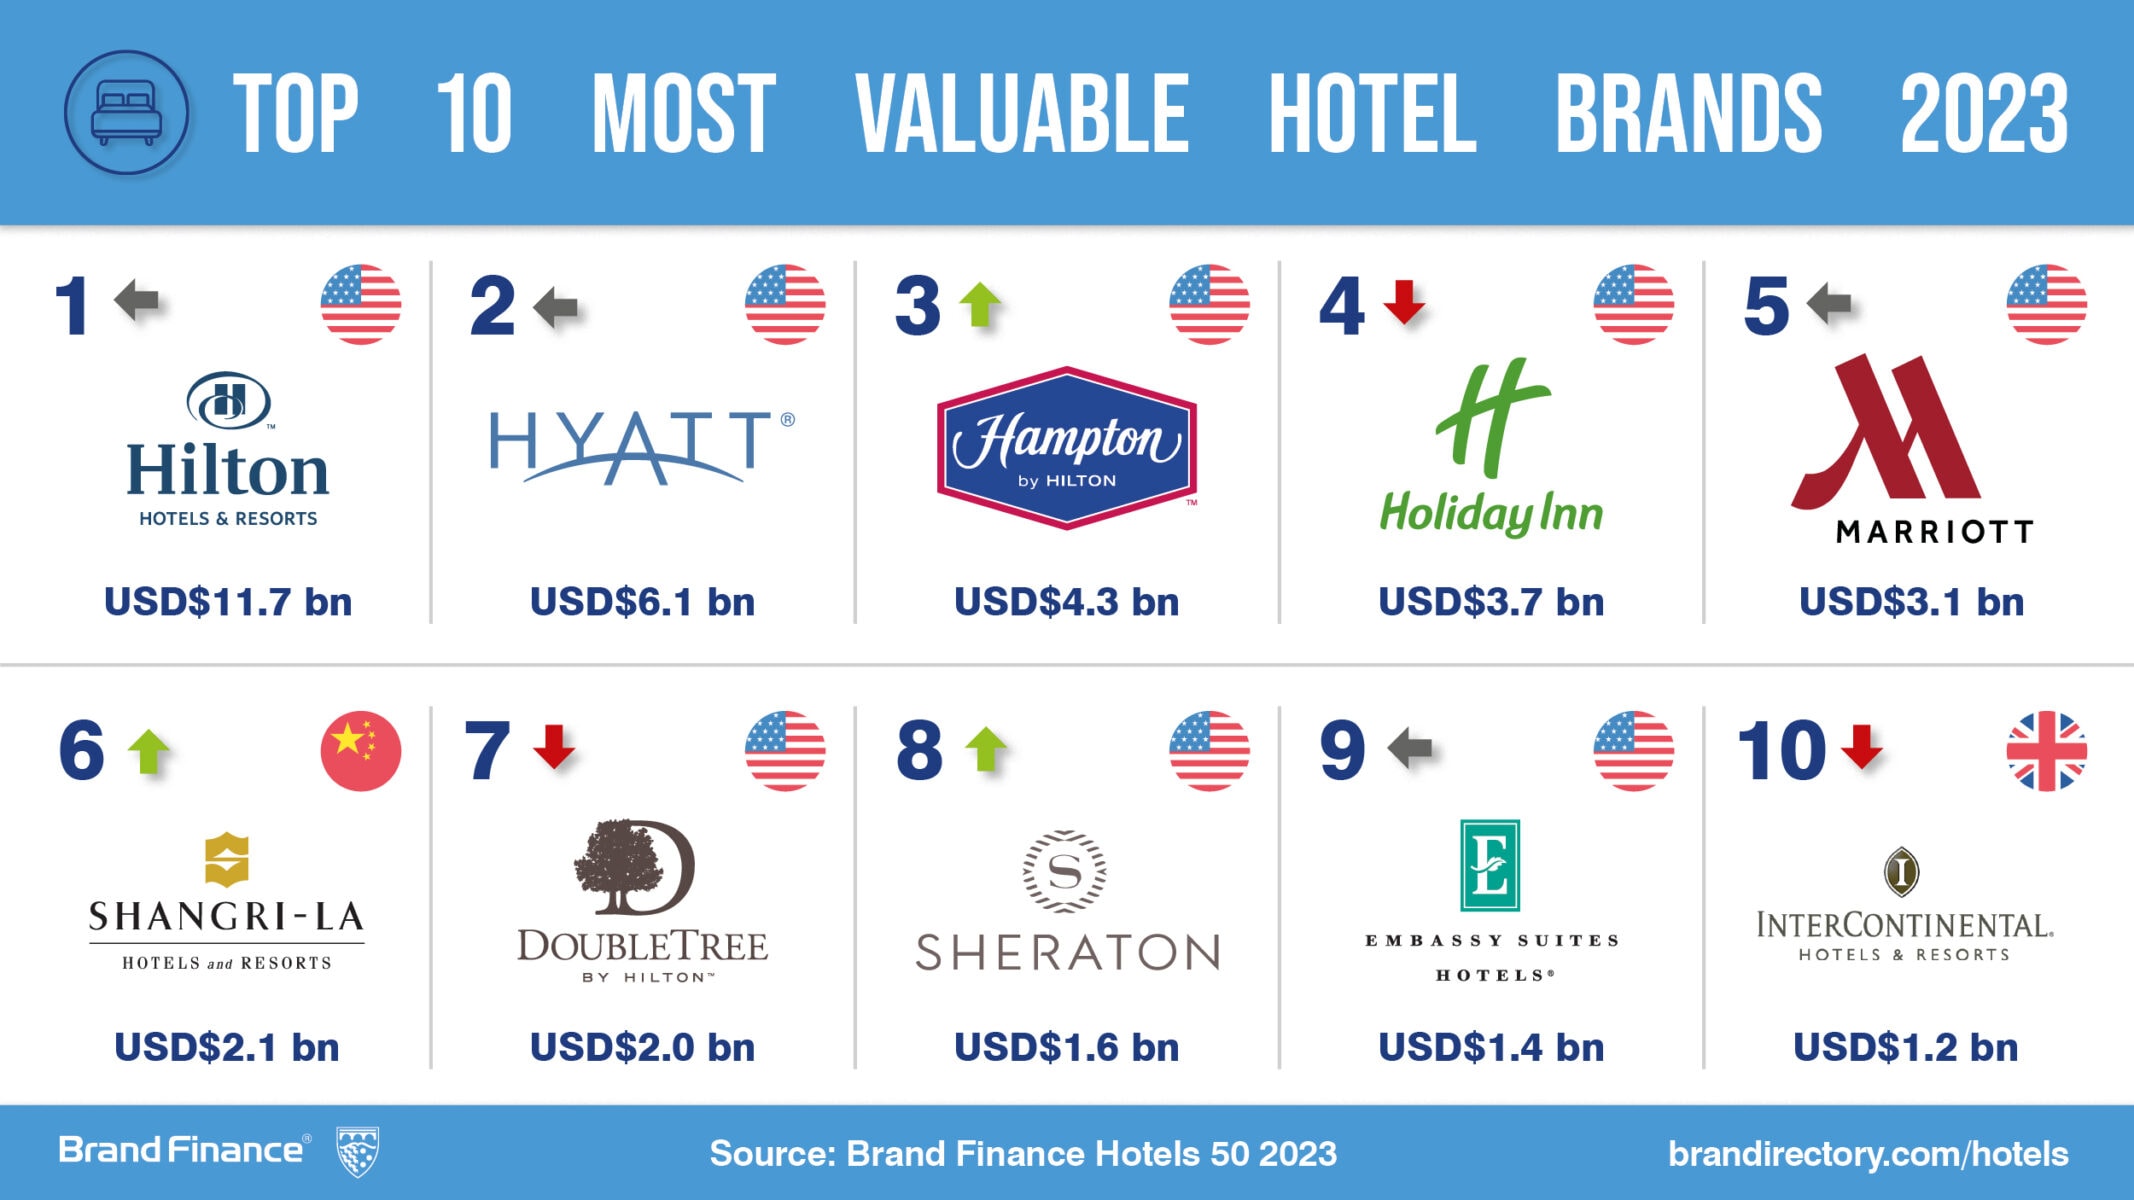 Hilton checks in as the world’s most valuable hotel brand Press